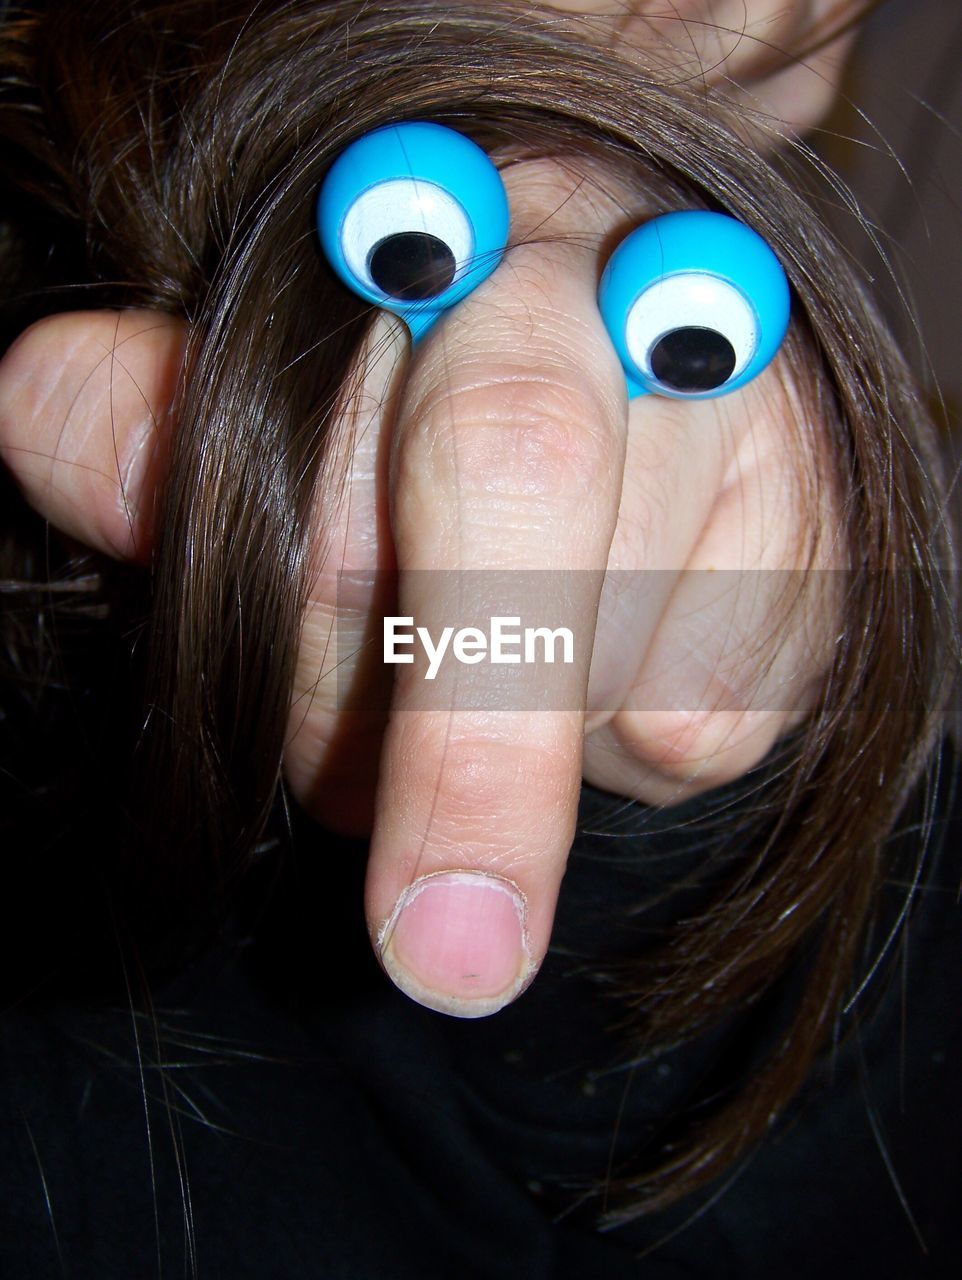 Cropped image of hand with artificial eyes and hair